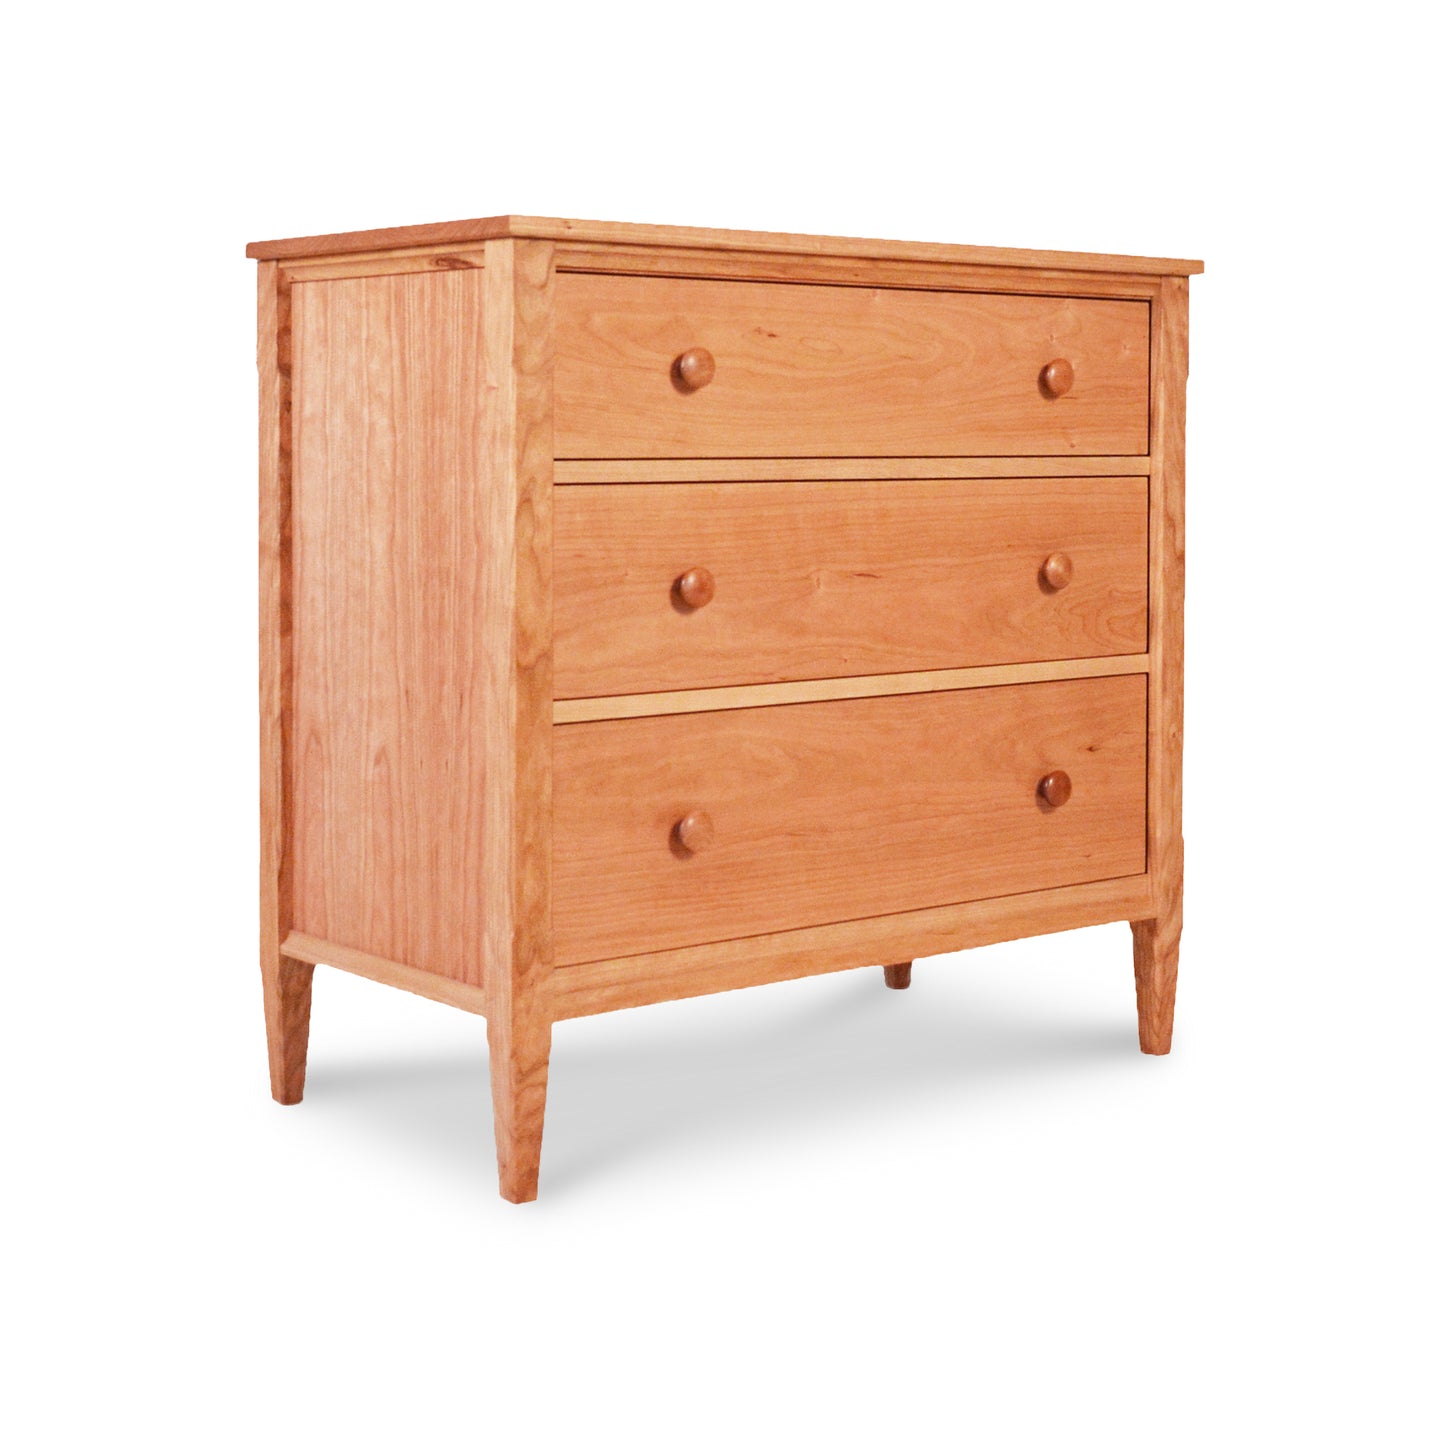 A Maple Corner Woodworks Vermont Shaker 3-Drawer Chest with round knobs on a white background. The dresser features a simple, sturdy design with slightly tapered legs.